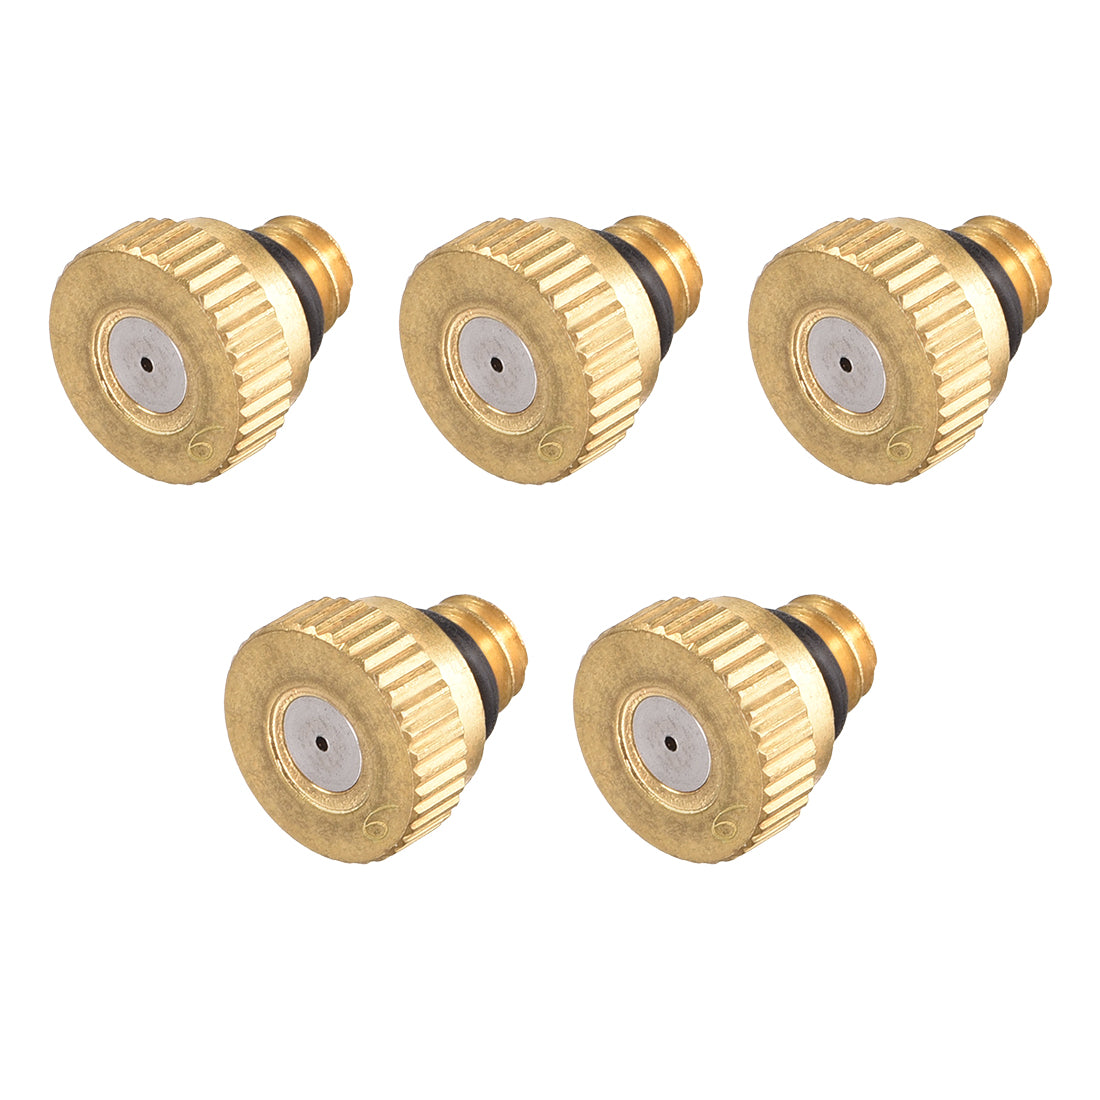 uxcell Uxcell Brass Misting Nozzle - 10/24 UNC 0.6mm Orifice Dia Replacement Heads for Outdoor Cooling System - 5 Pcs